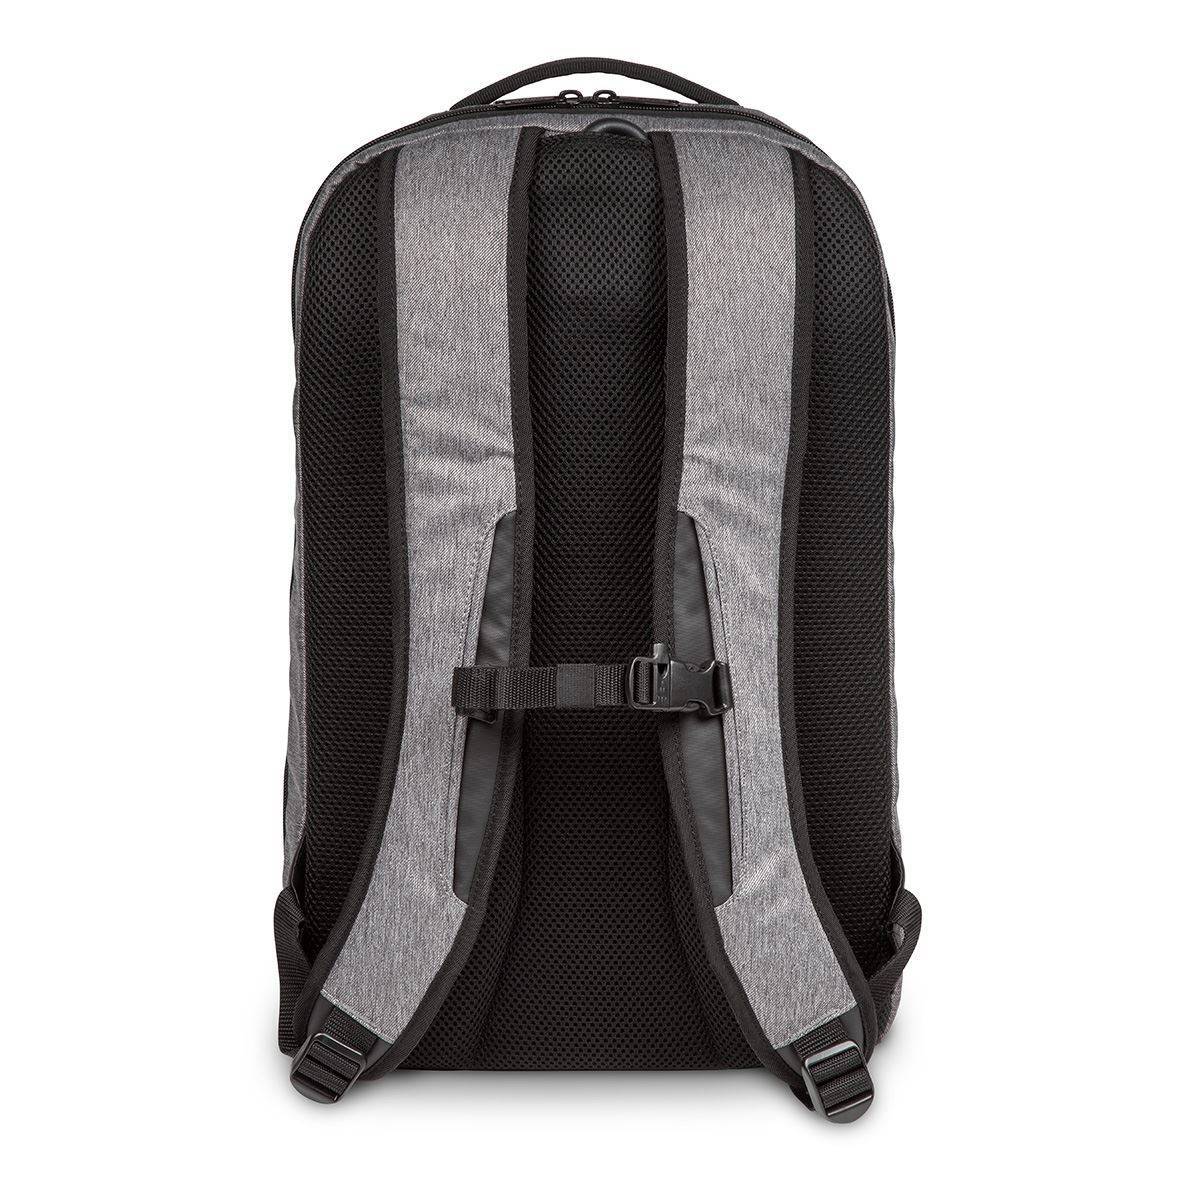 Rca Informatique - image du produit : WORK AND PLAY FITNESS 15.6IN LAPTOP BACKPACK GREY